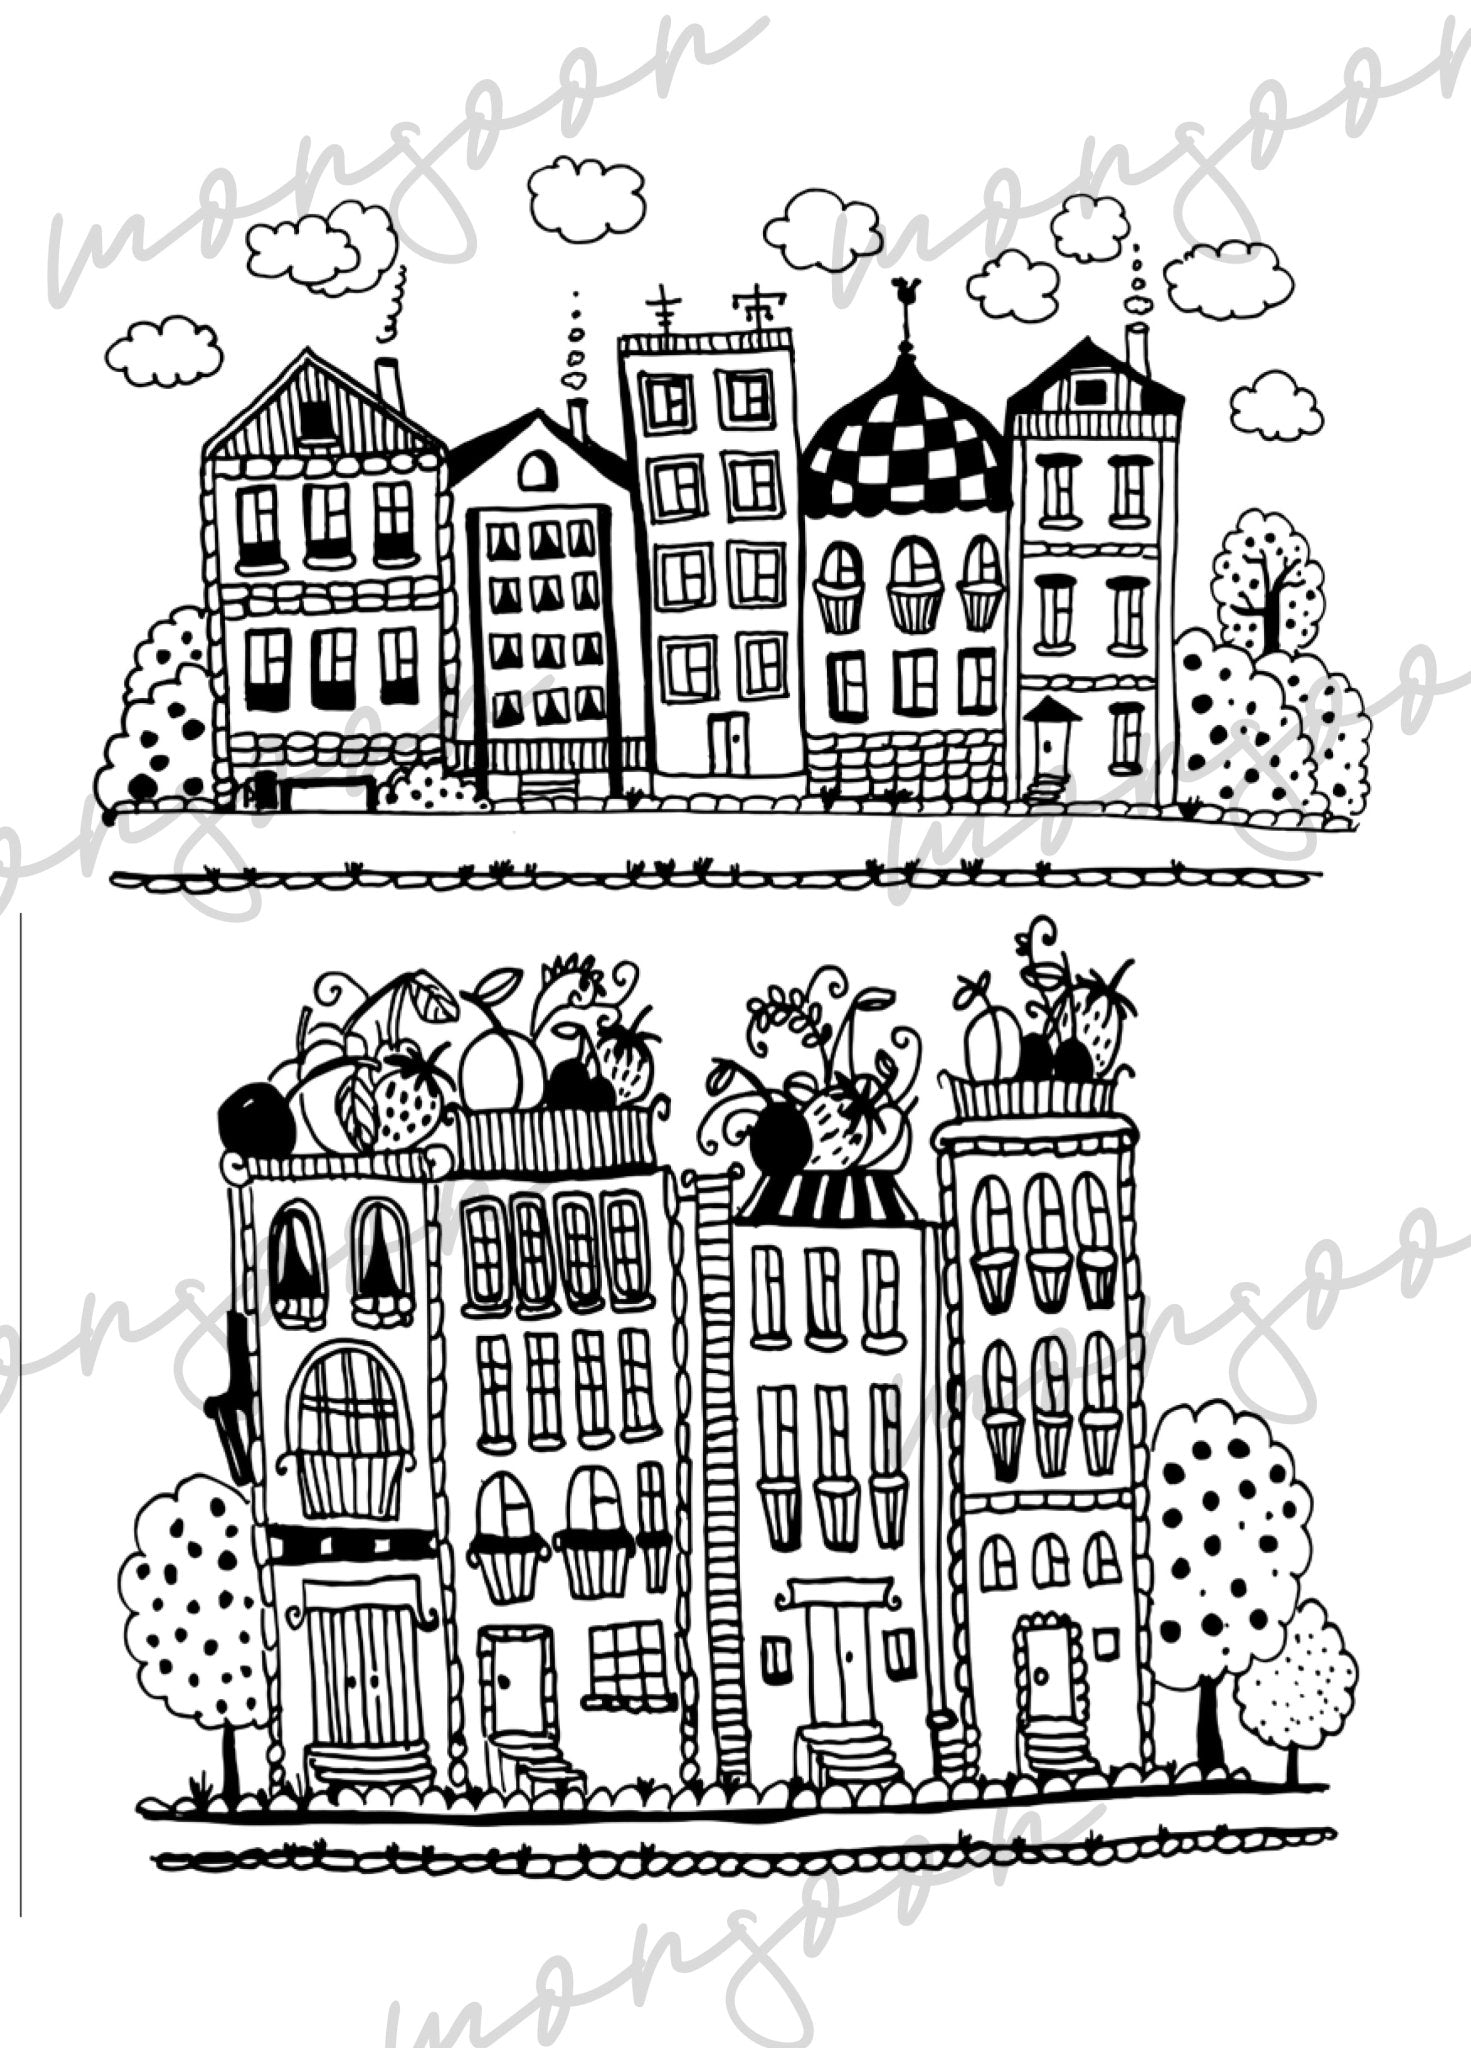 Cities Houses Castles Coloring Book (Printbook) - Monsoon Publishing USA